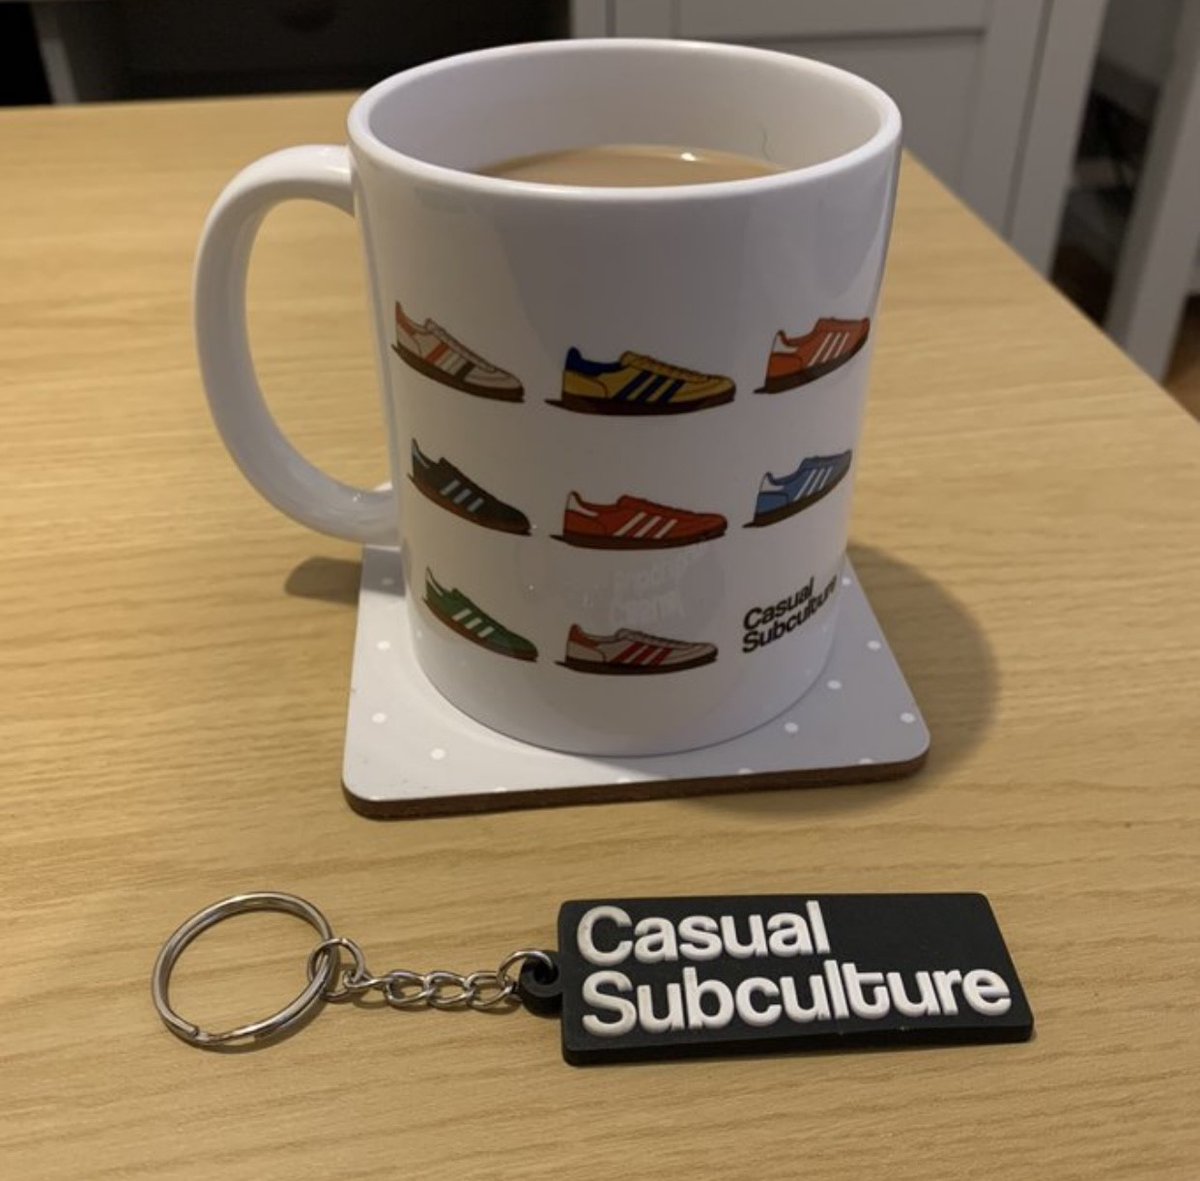 Sunday Giveaway 🔥🙌 Arsenal vs Man United ⚽️ 1. Retweet 2. Comment with the minute the first goal will be scored. Winner will receive one of our Casual Subculture Mugs & a Keyring 👌 *If there are multiple guesses of the same minute the prize will go to the 1st comment.